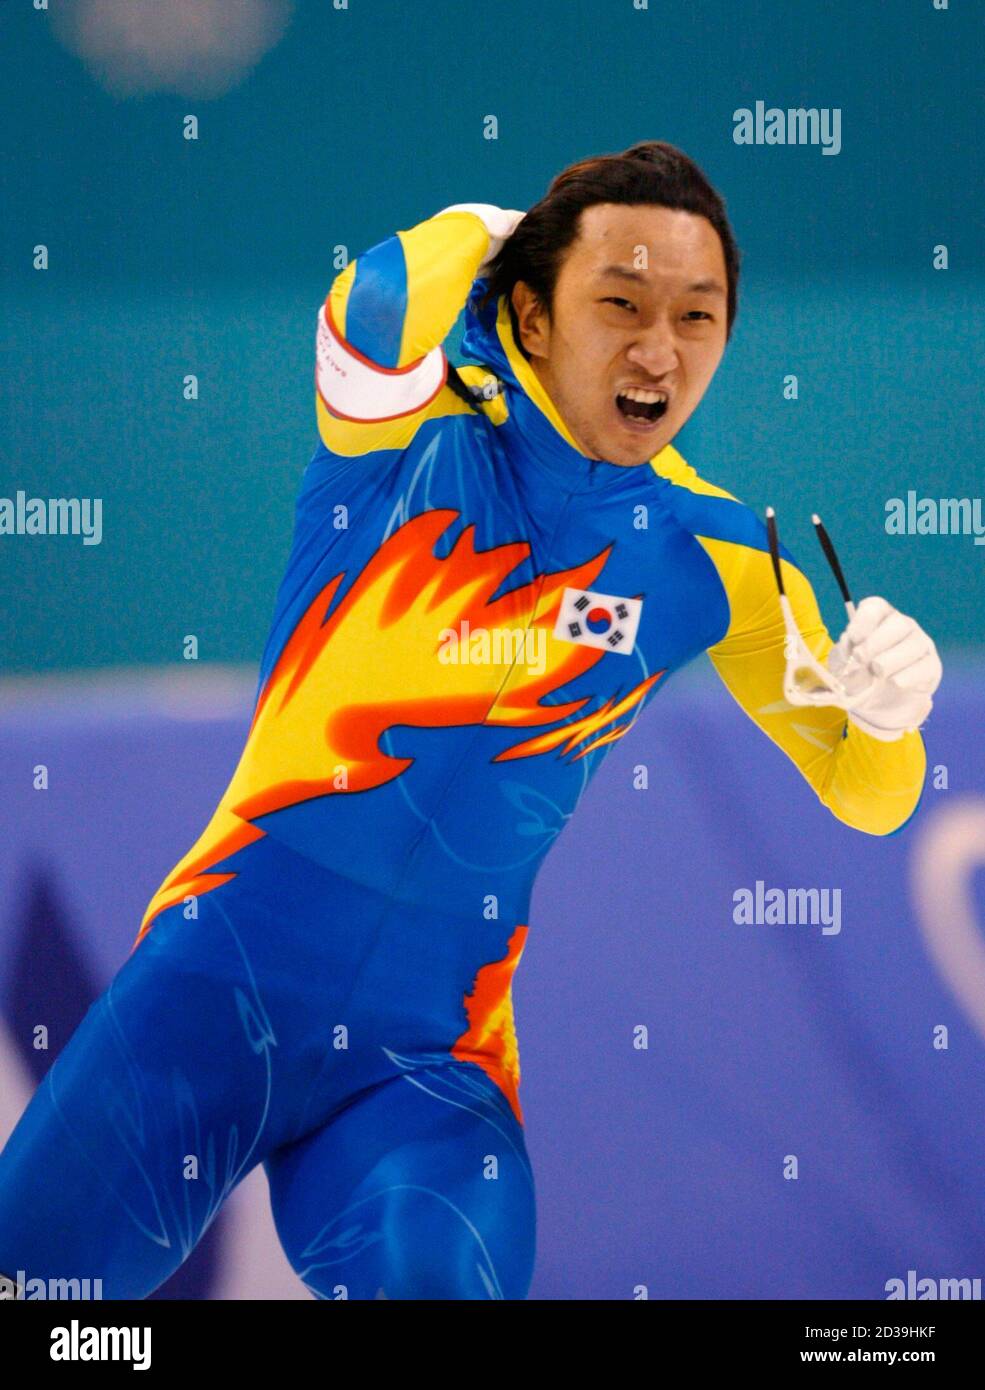 Lee Kyu-Hyuk of South Korea reacts after the men's 500m speed skating race  one at the Salt Lake 2002 Olympic Winter Games, February 11, 2002.  REUTERS/Kimimasa Mayama DL/HB Stock Photo - Alamy